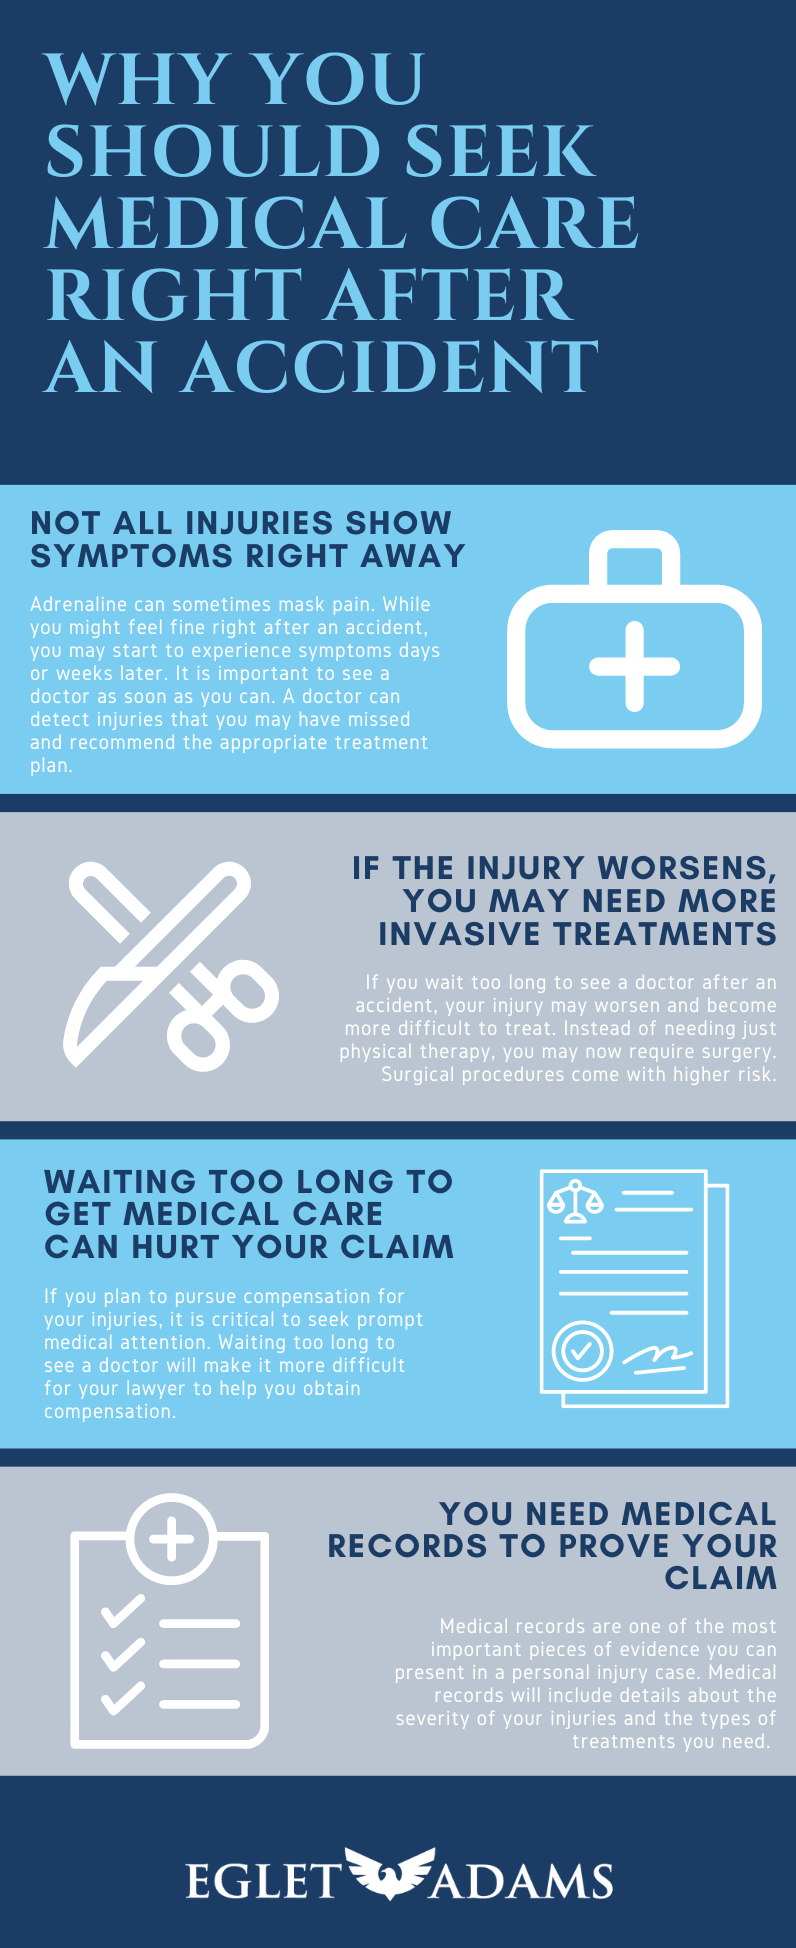 Why You Should Seek Medical Care Right After An Accident Infographic